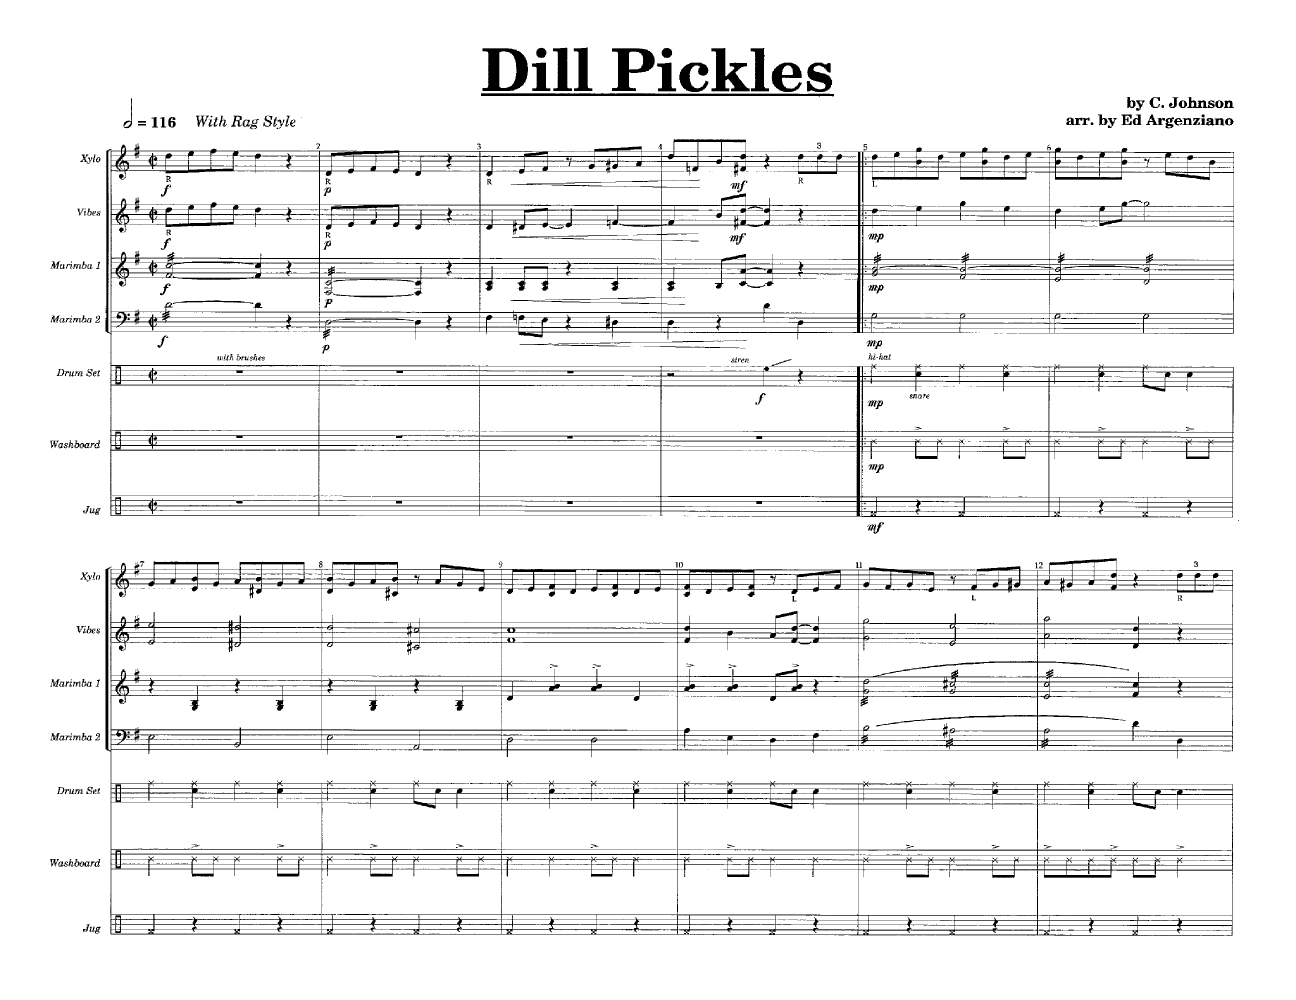 Dill Pickles by Johnson arr. Argenziano